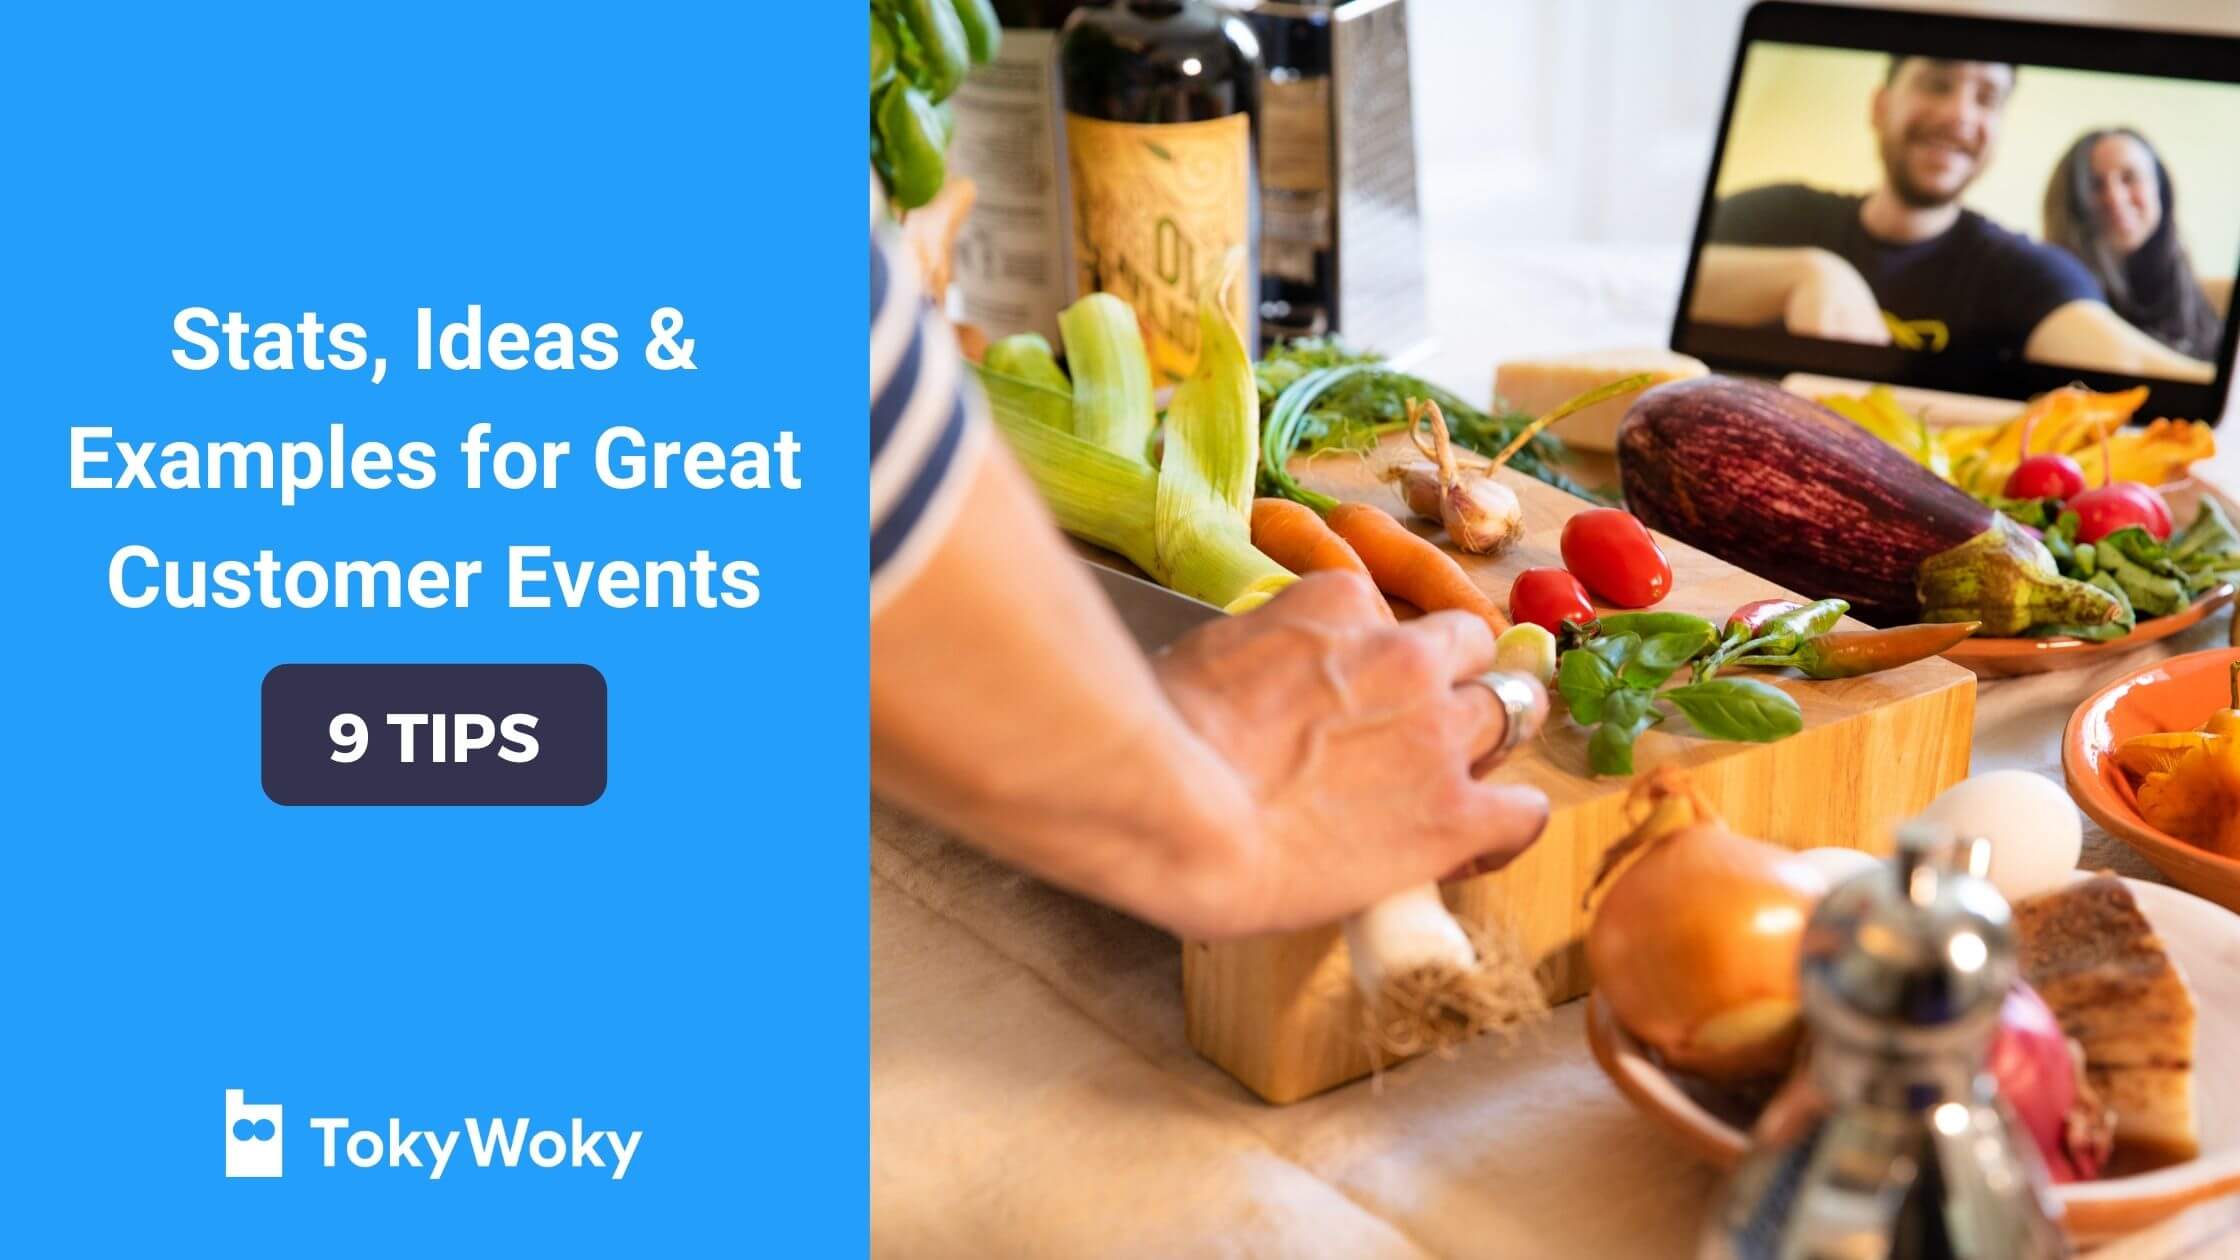 Tips for great customer events